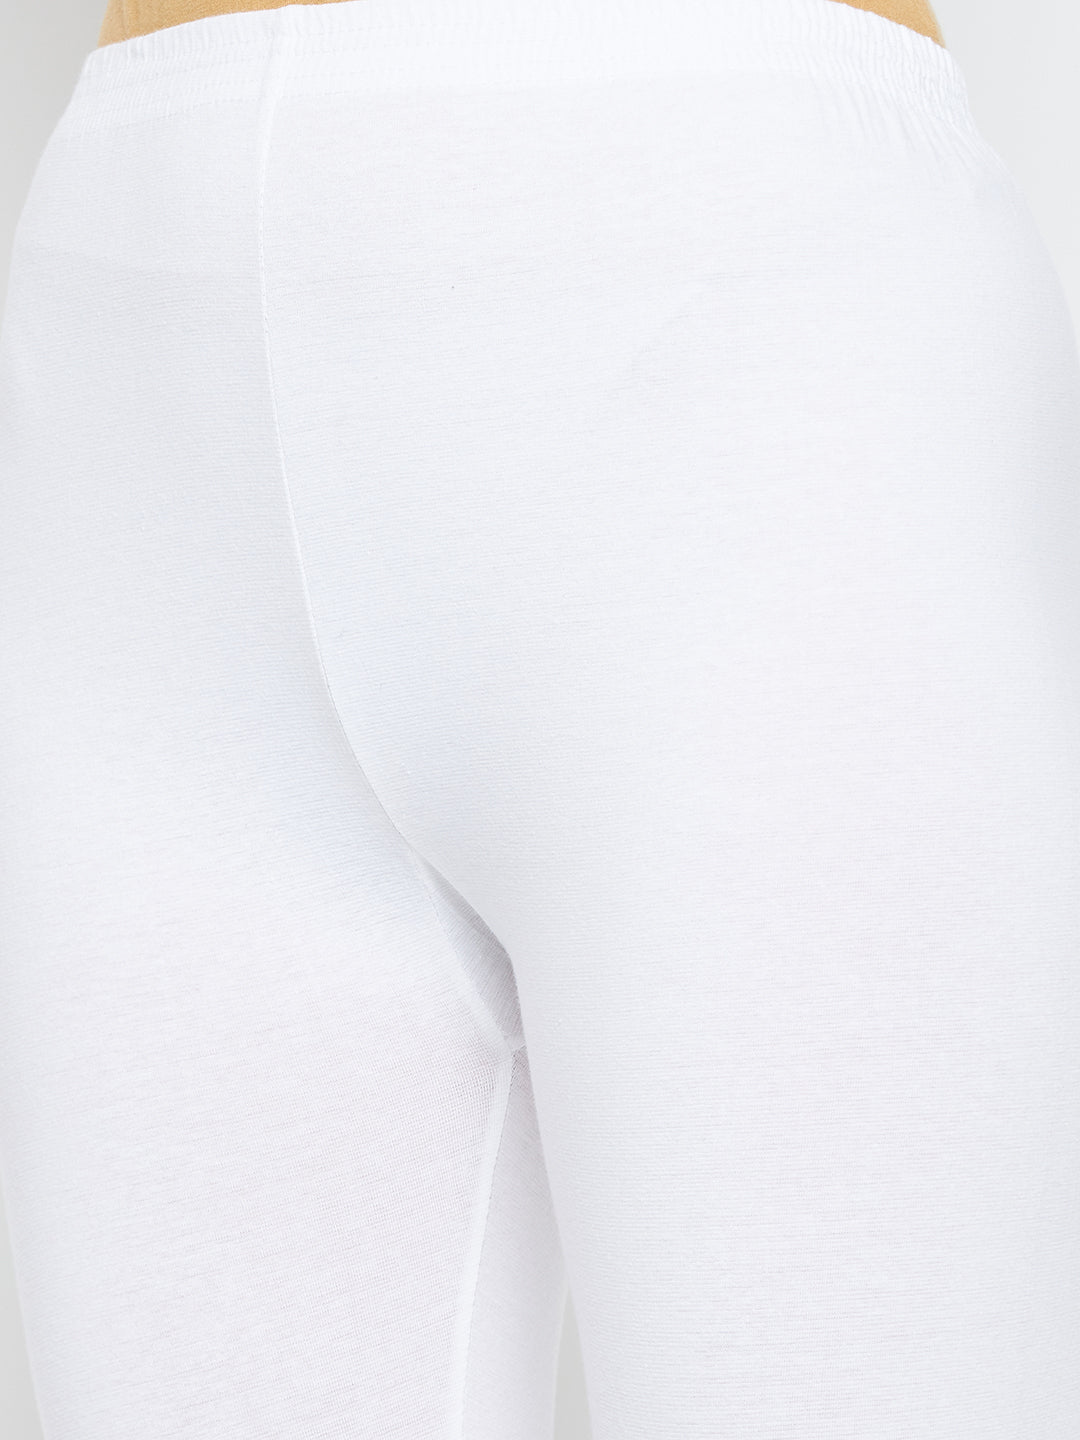 Clora Off-White Solid Ankle Length Leggings